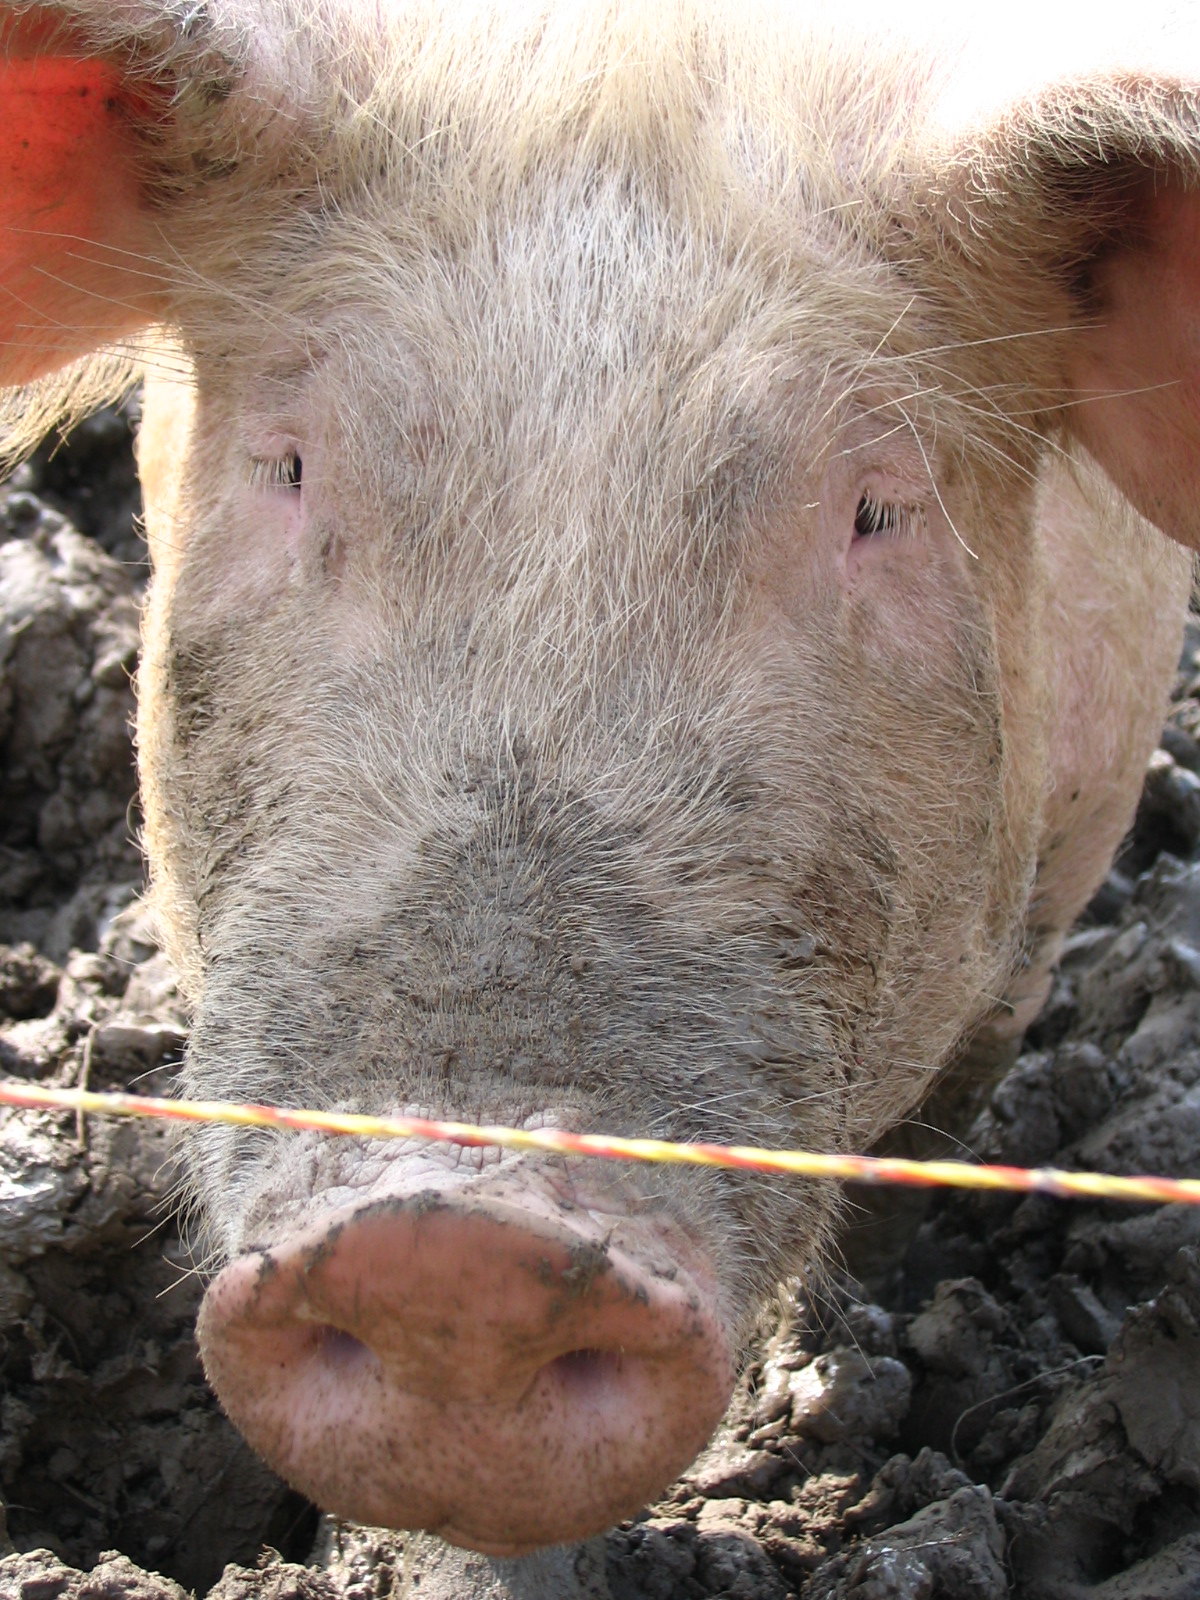 close up of face of an animal in dirt